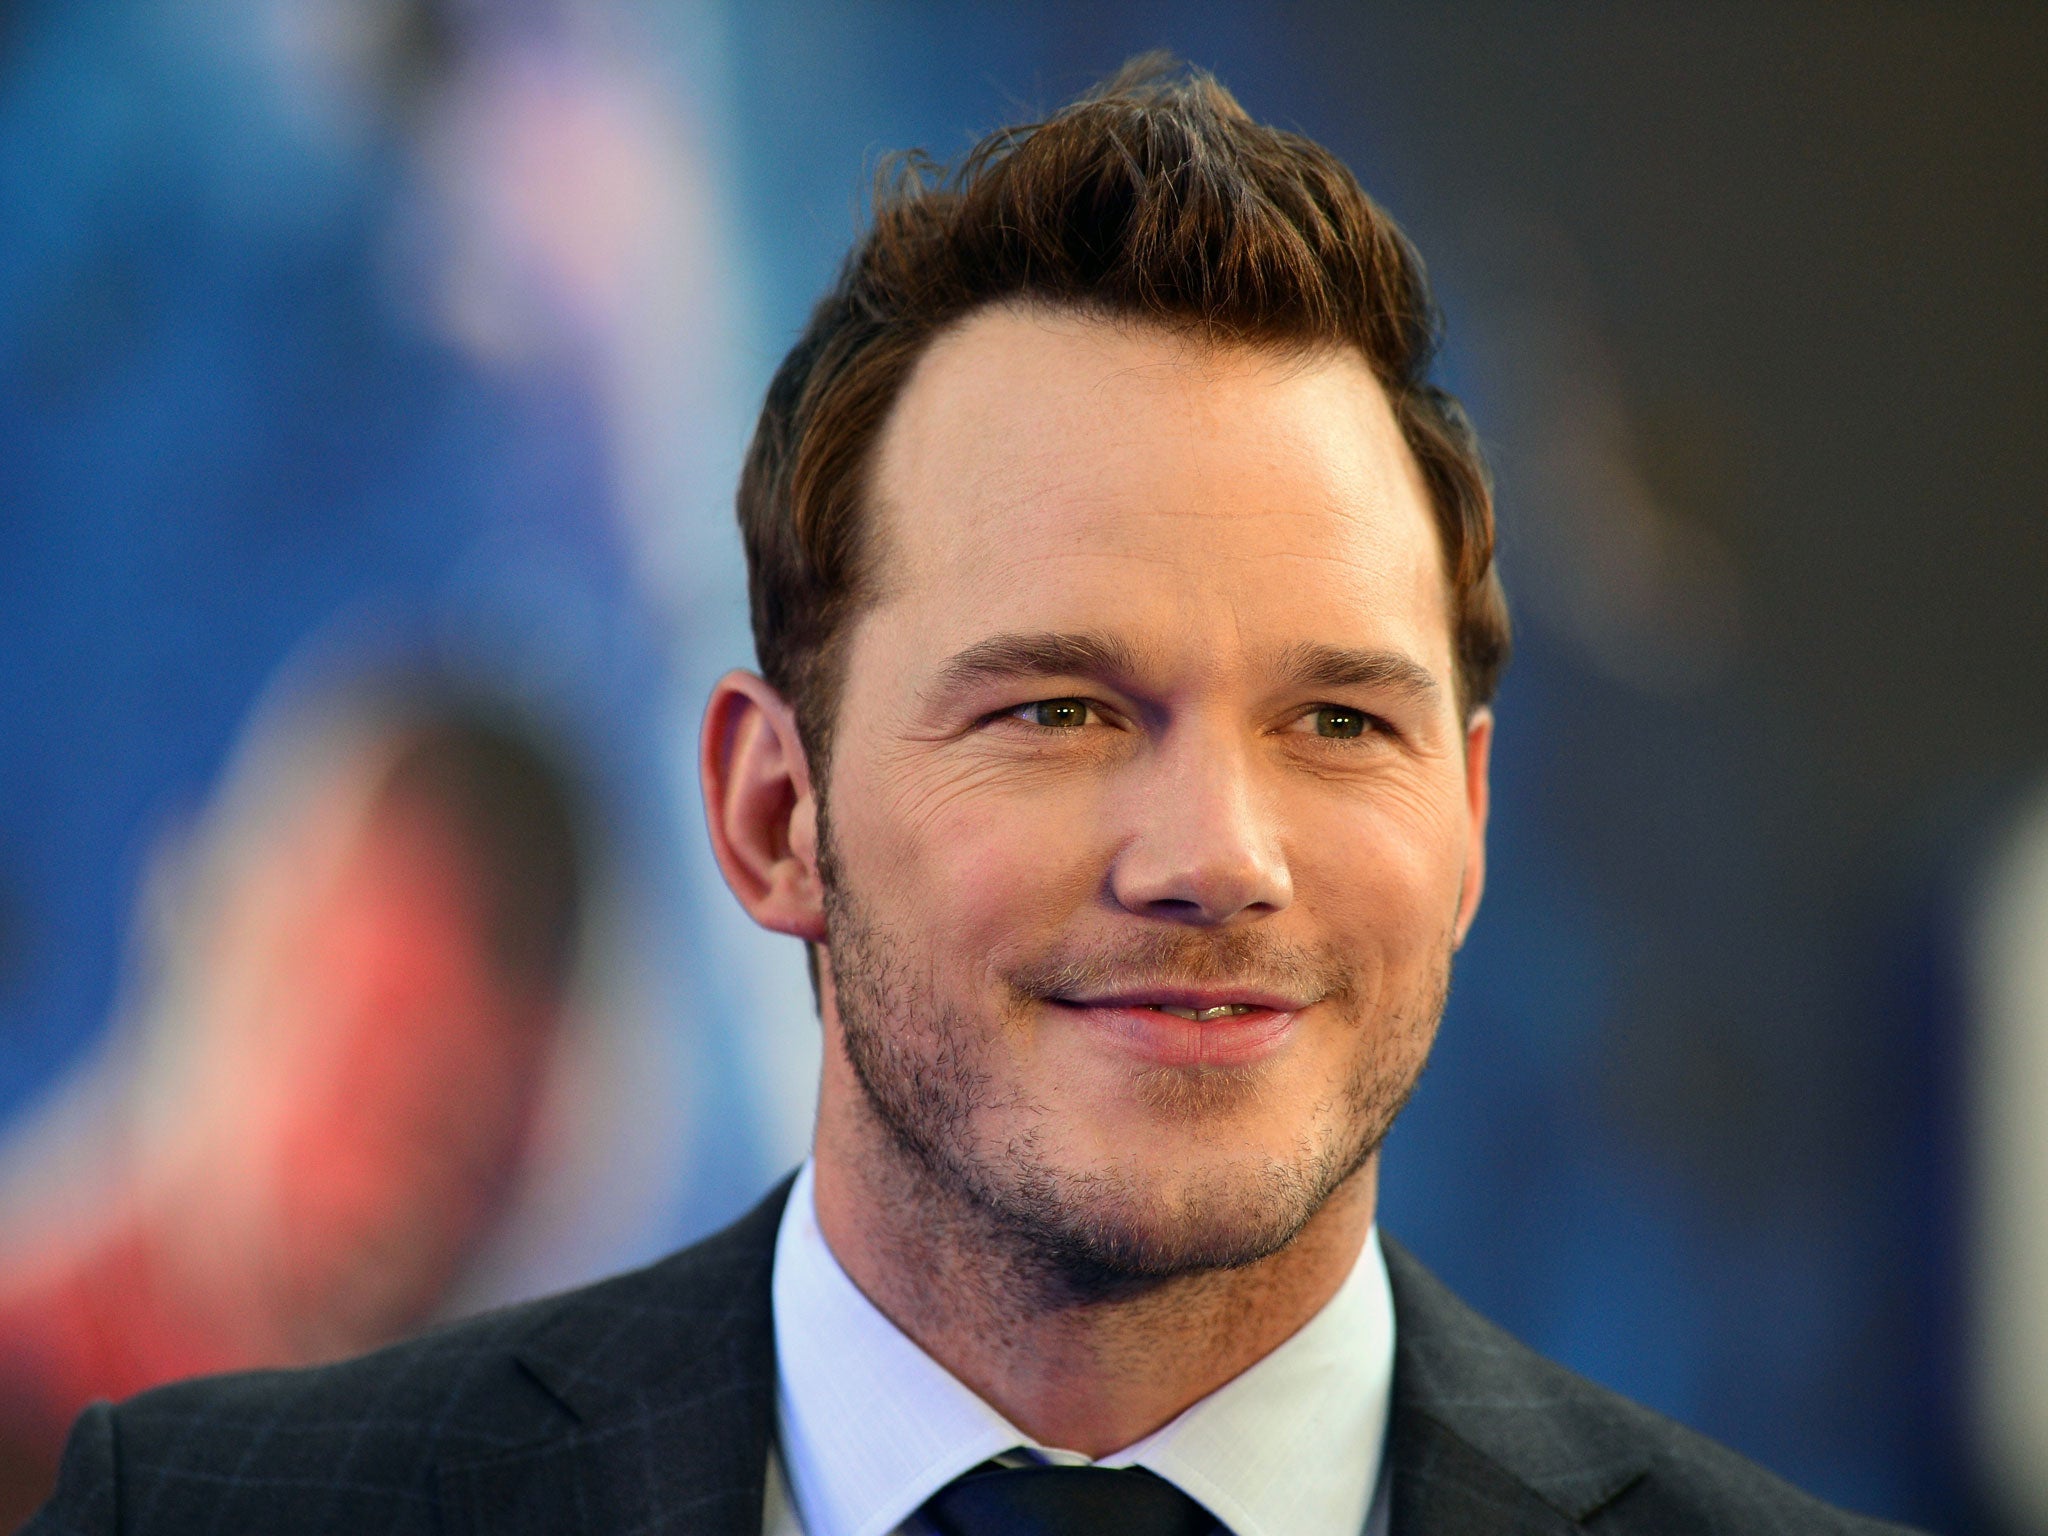 Chris Pratt has spoken about hunting in the past